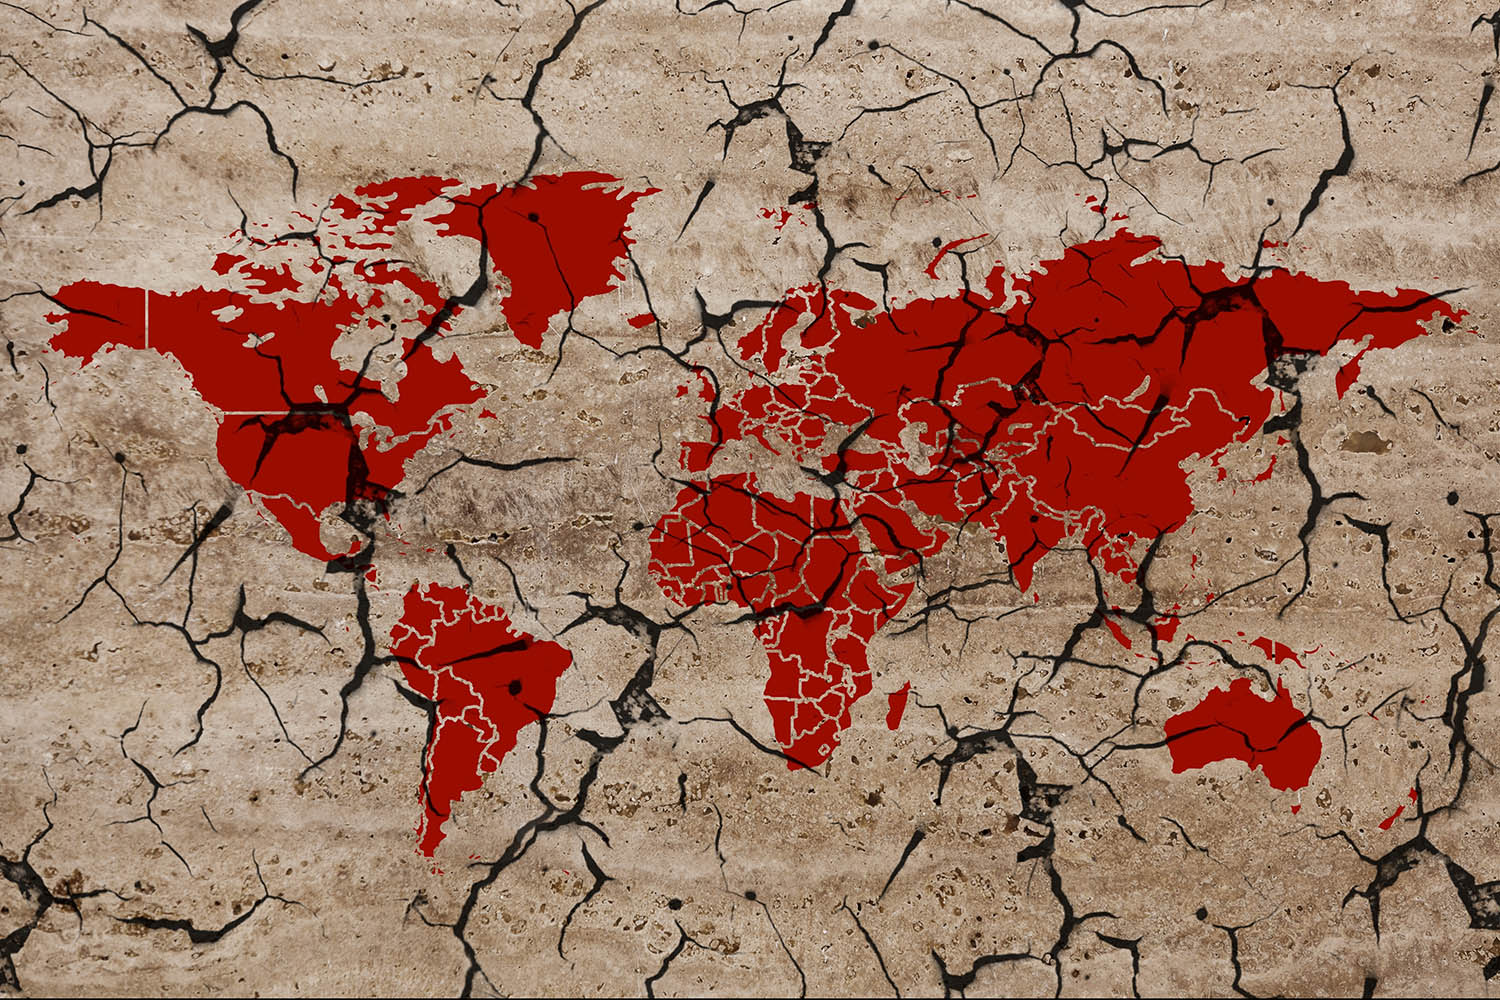 A map of the world with each continent in red, on a beige background. The background is cracked, suggesting cracked earth.